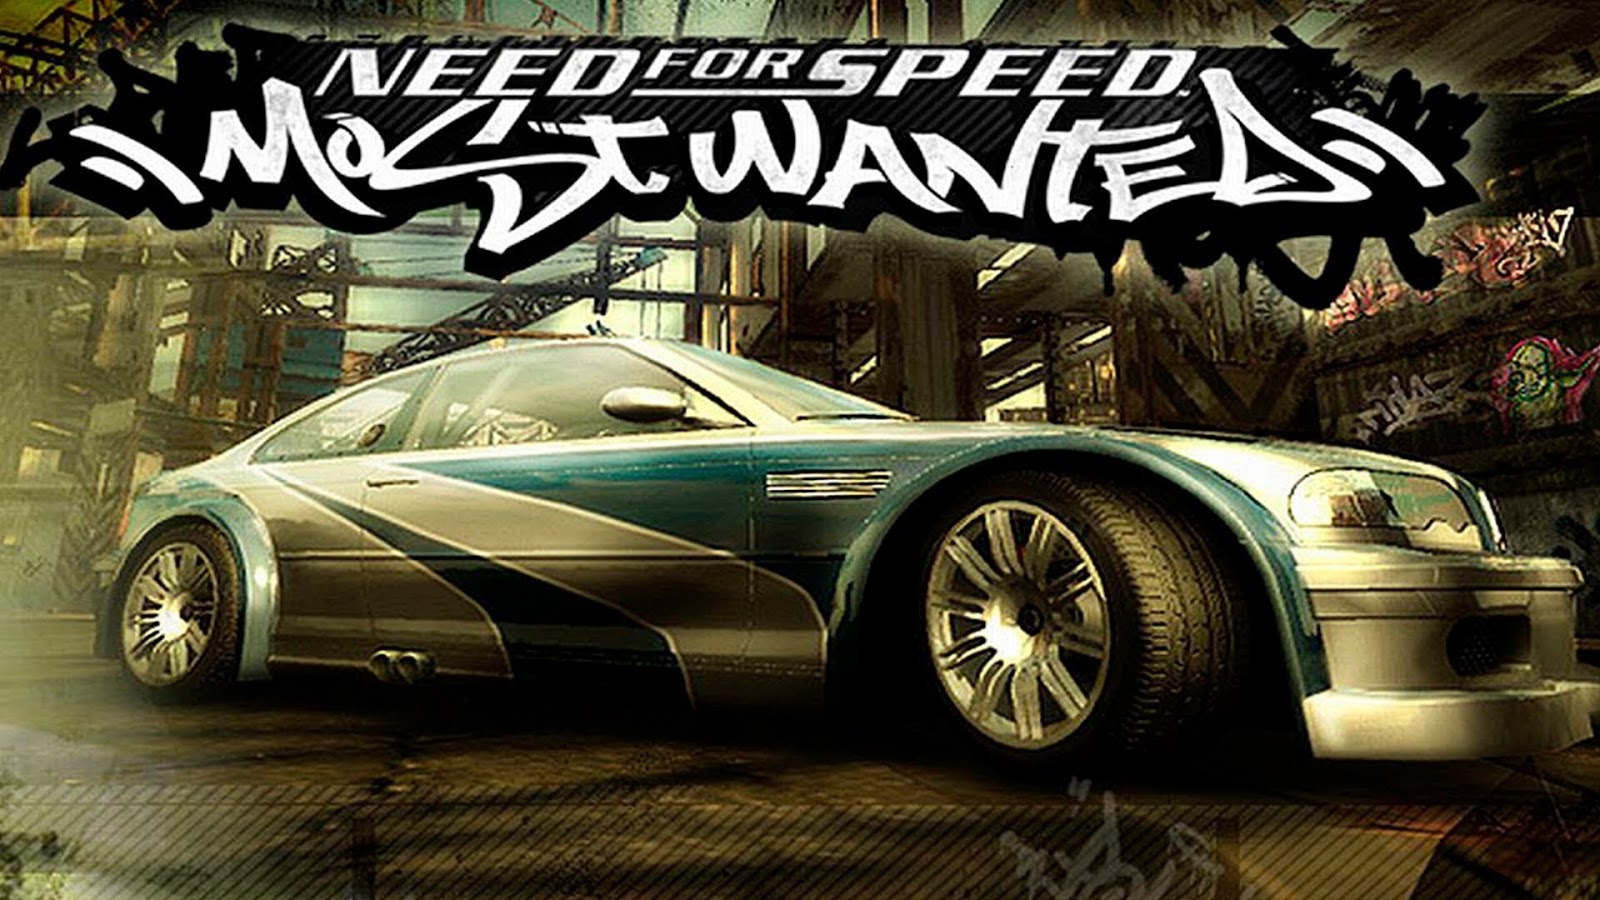 Nfs most wanted 2005 full version download